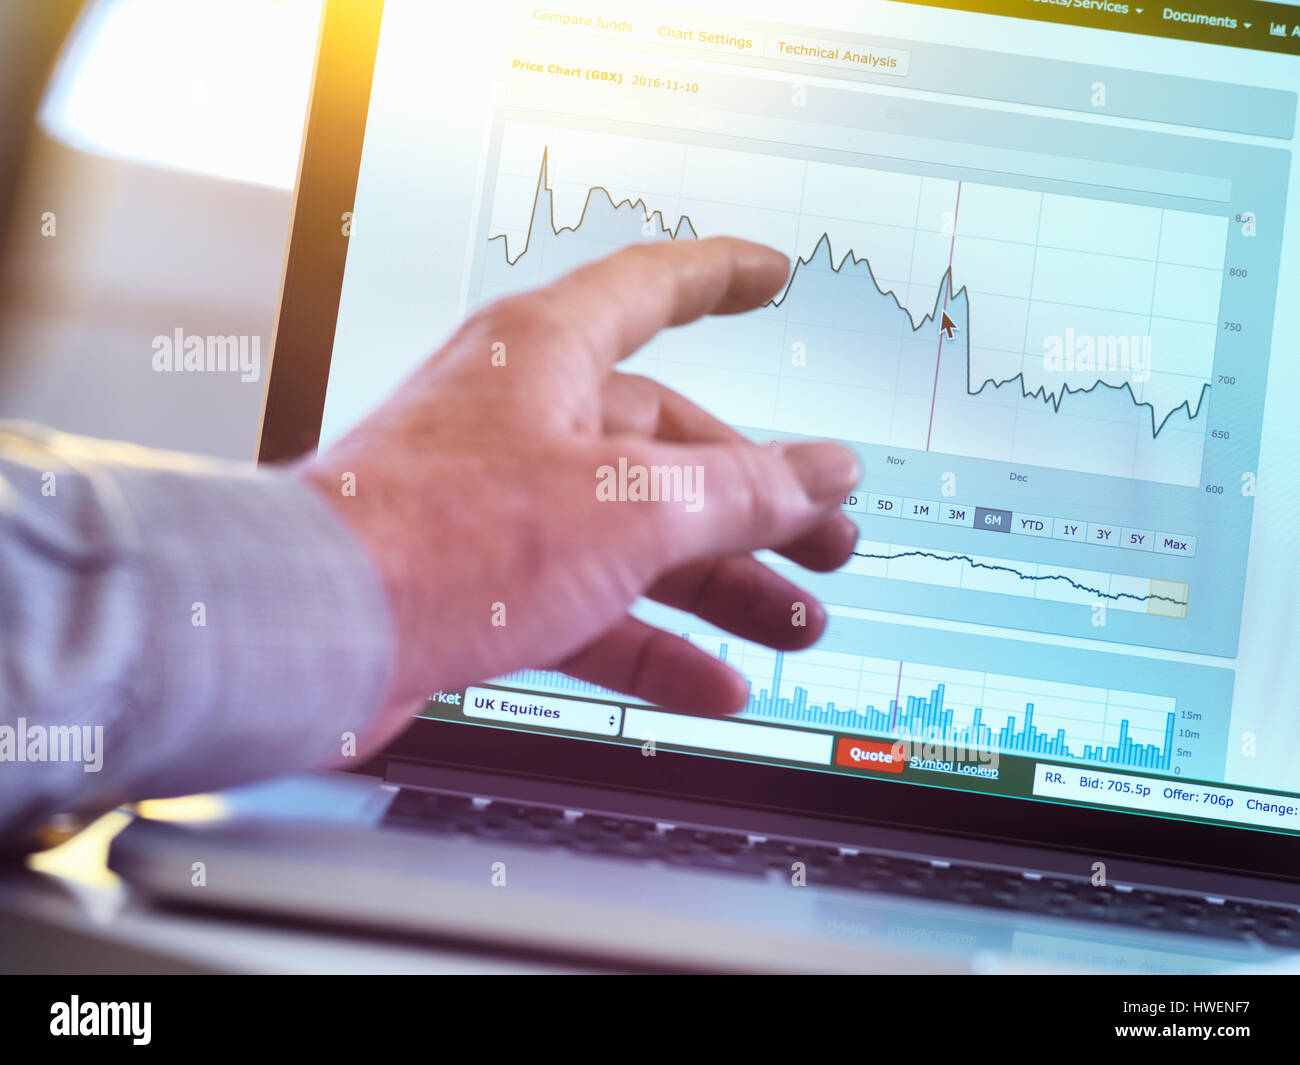 Investor viewing company share price market data on a laptop computer Stock Photo